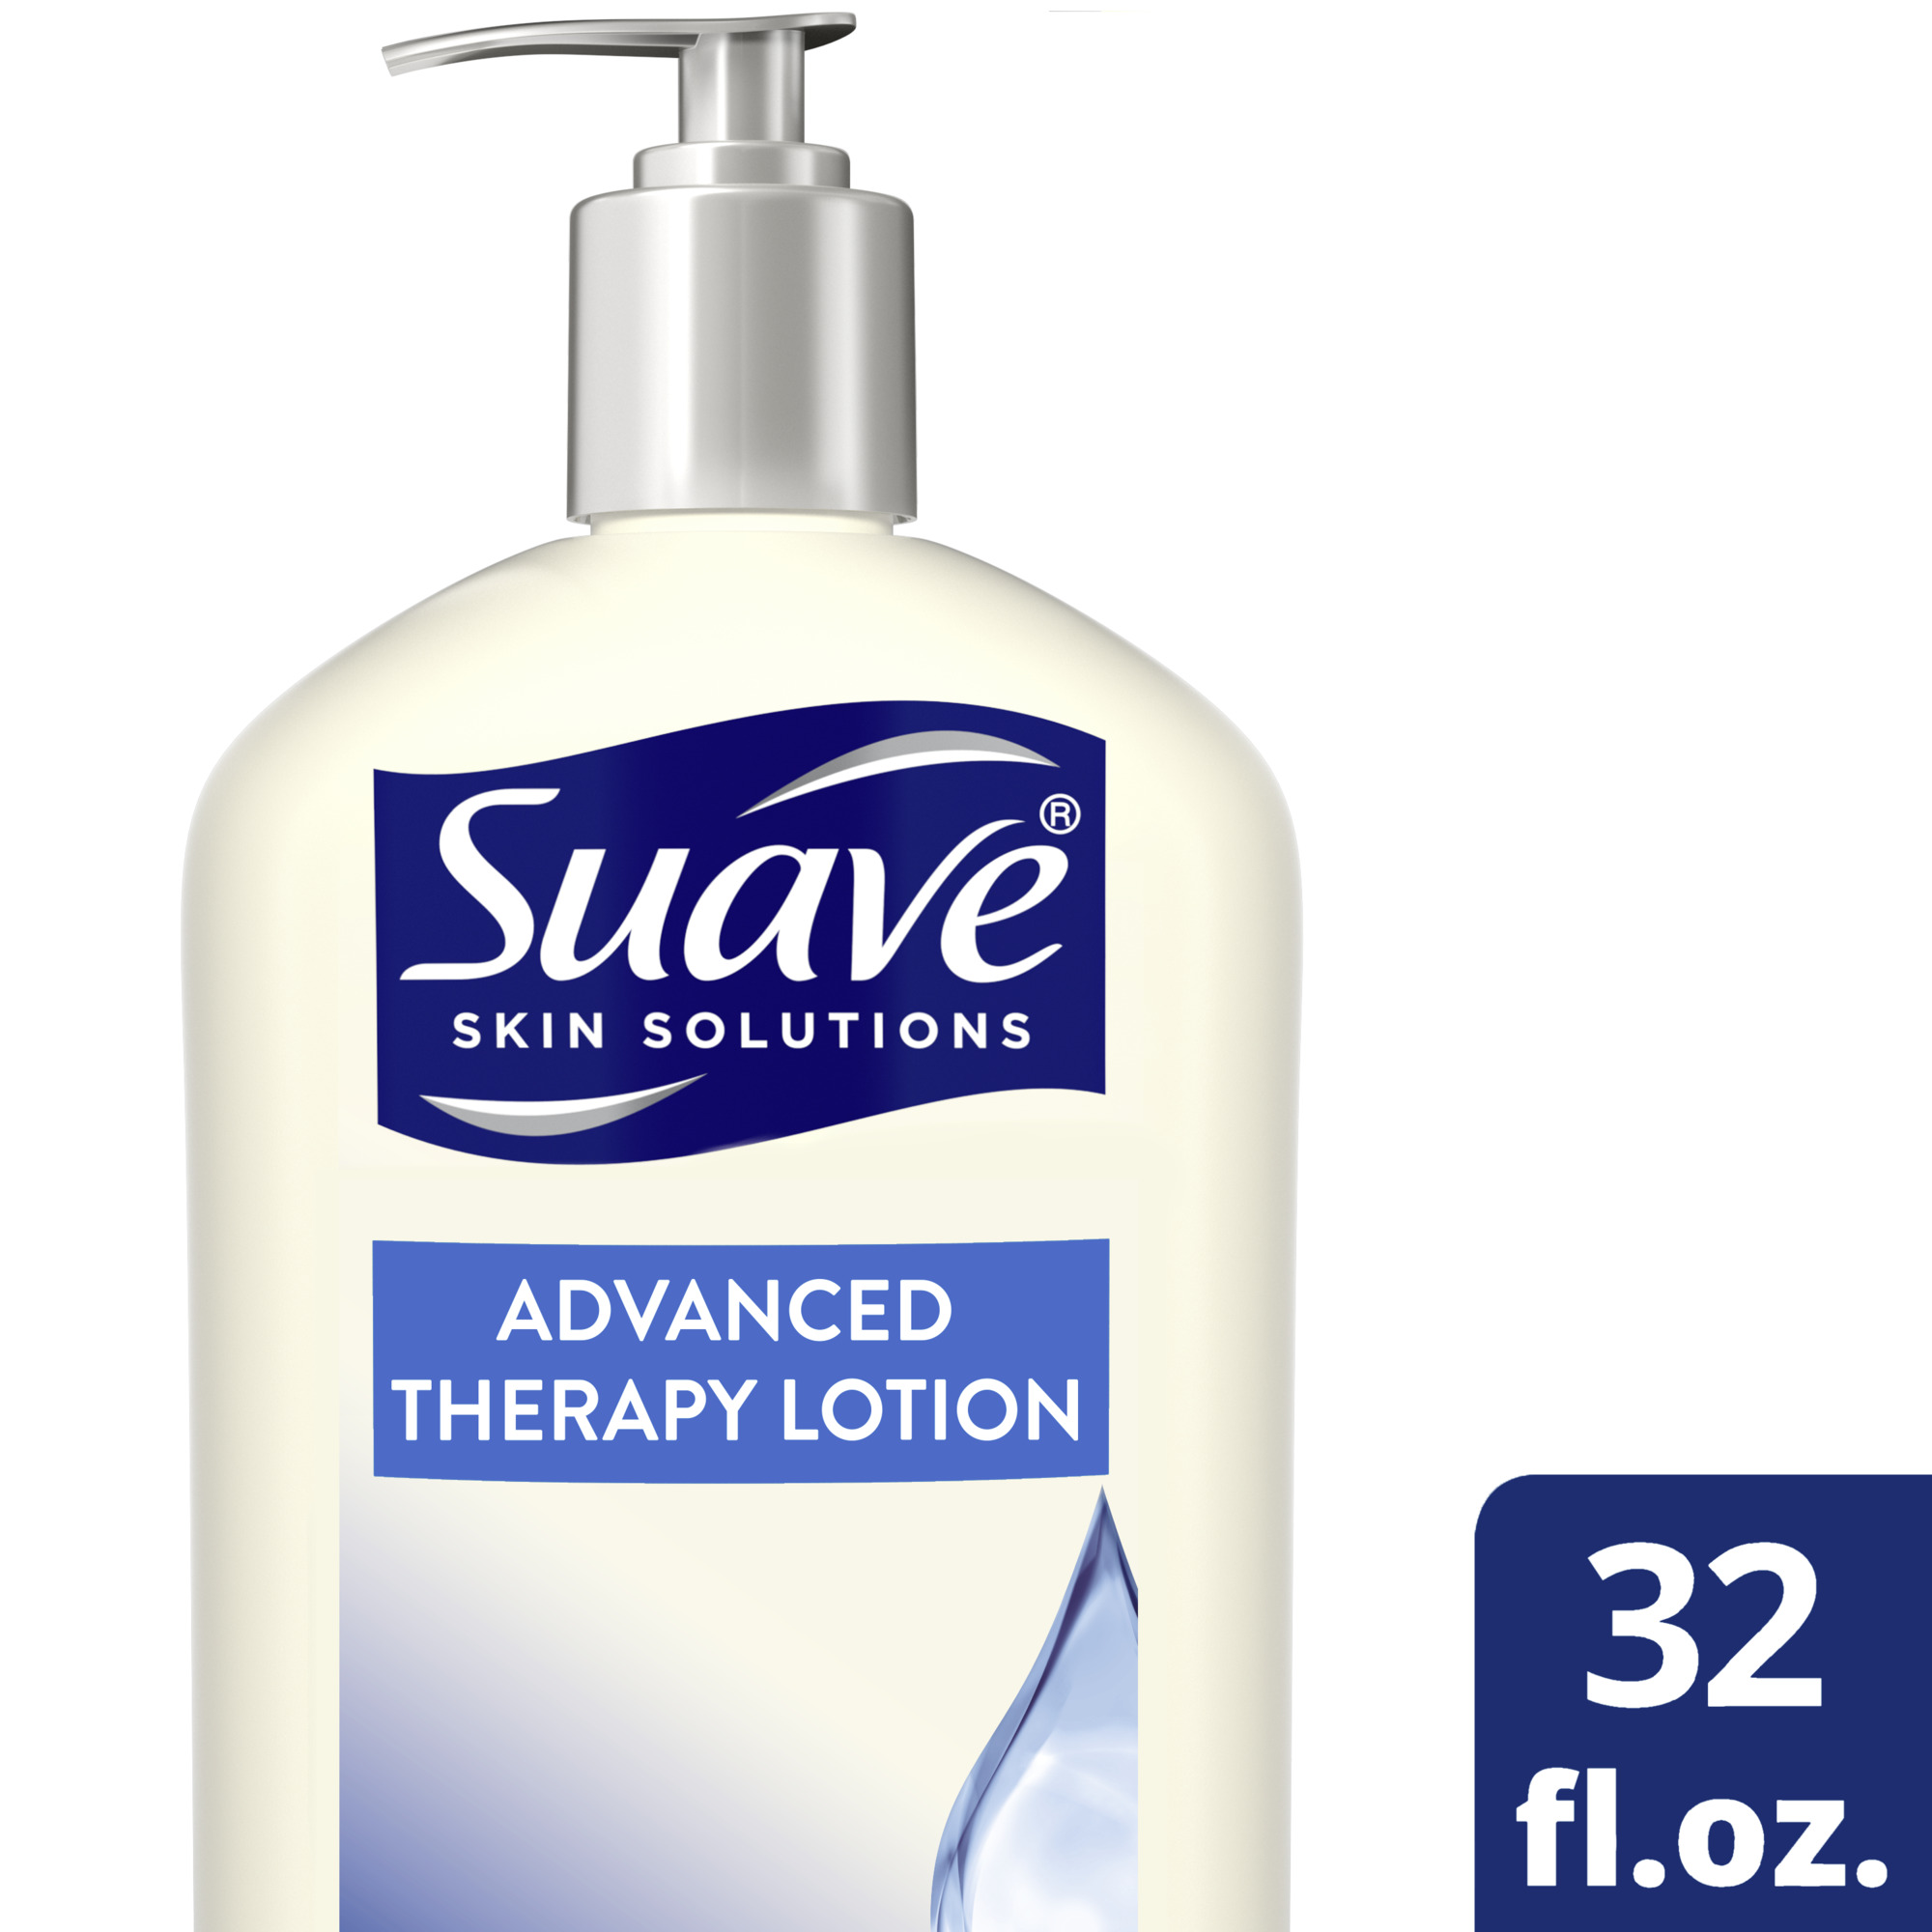 Suave Skin Solutions Moisturizing Body Lotion, Advanced Therapy, Dermatologist Tested for All Skin Types, 32 oz - image 3 of 11